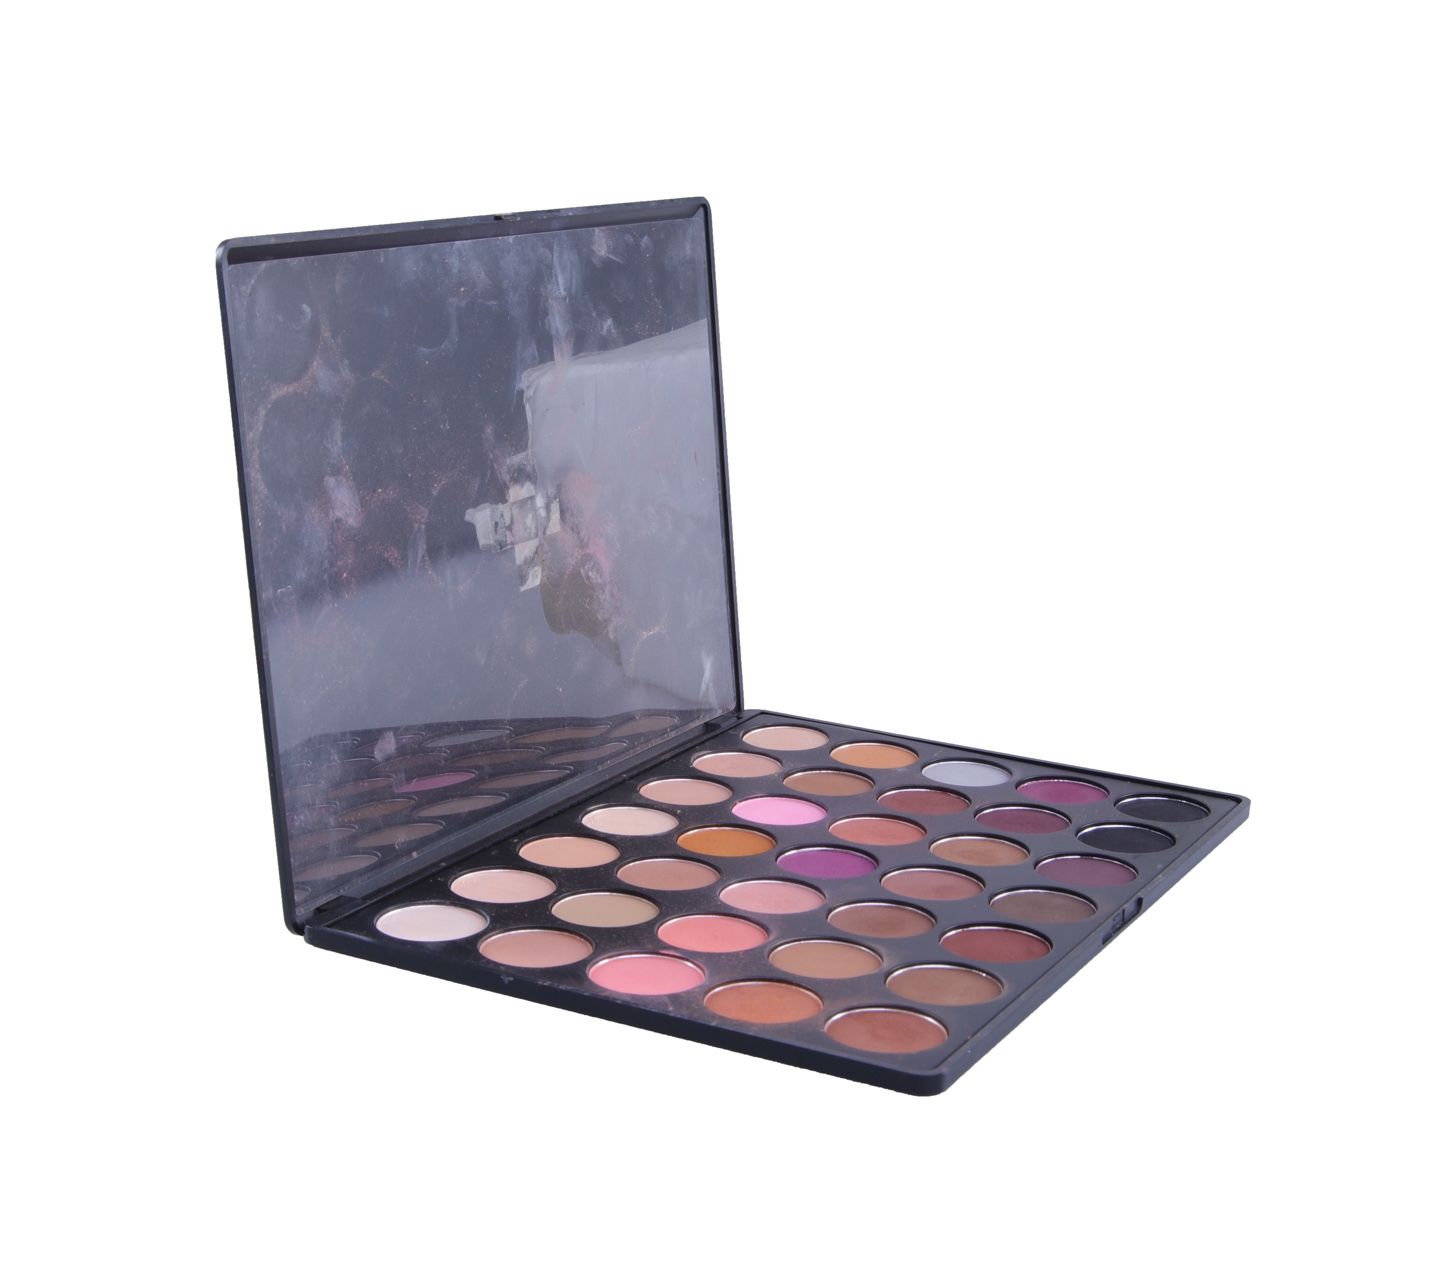 Morphe Eyeshadow Palette Sets and Palette